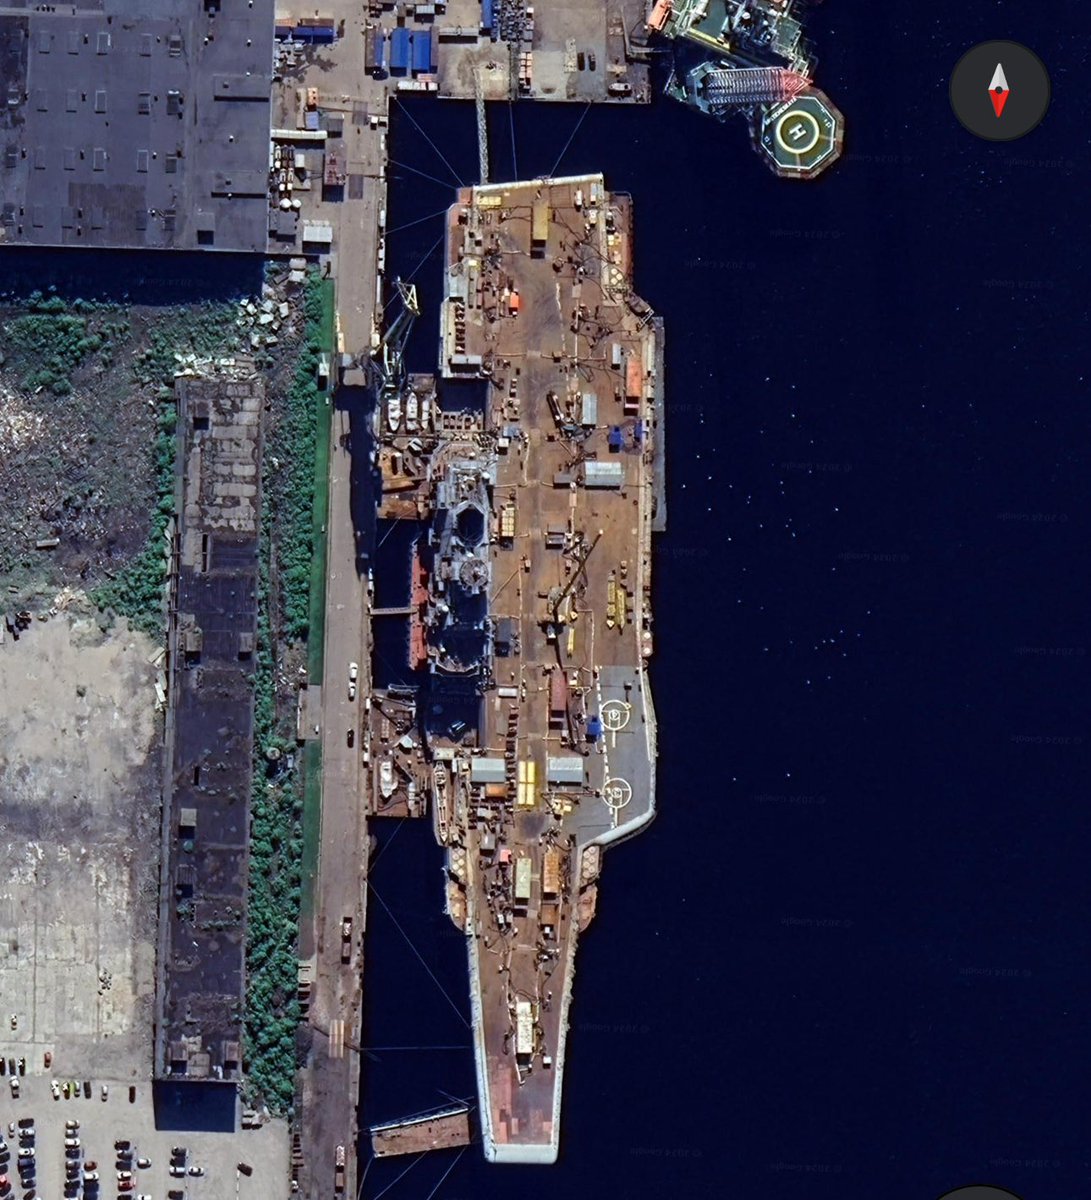 CONFIRMED: uss eisenhower (pictured docked for repairs in souda bay) hit and severely damaged by multiple houthi ballistic missiles.

judging by extensive tent city developing on the flight deck, we assess it is unlikely eisenhower will return to service in the foreseeable future